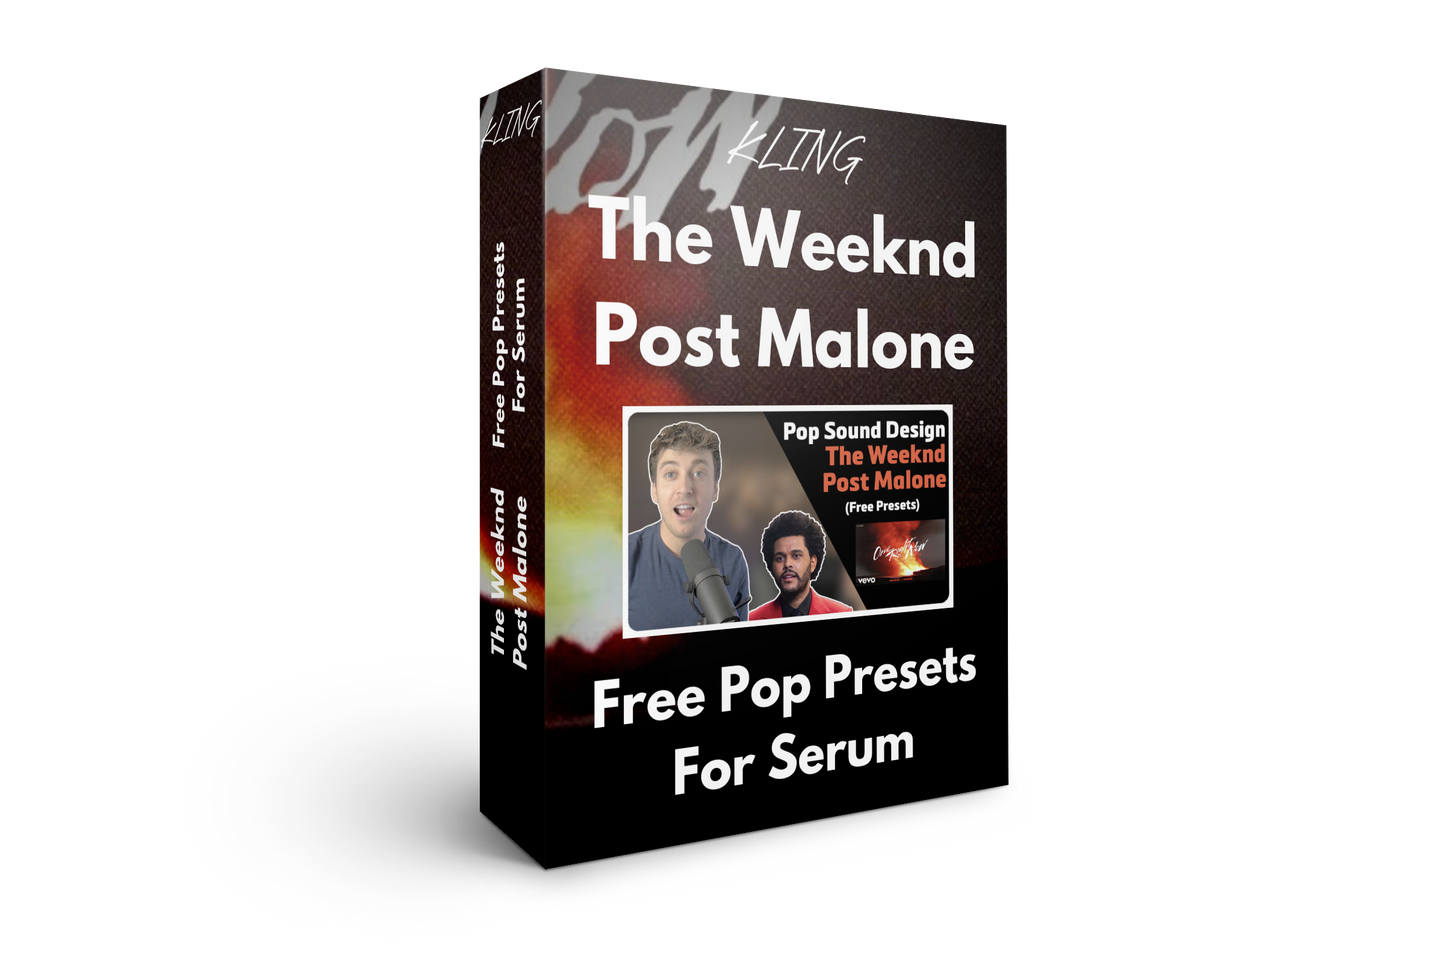 THE WEEKND x POST MALONE Pop Presets